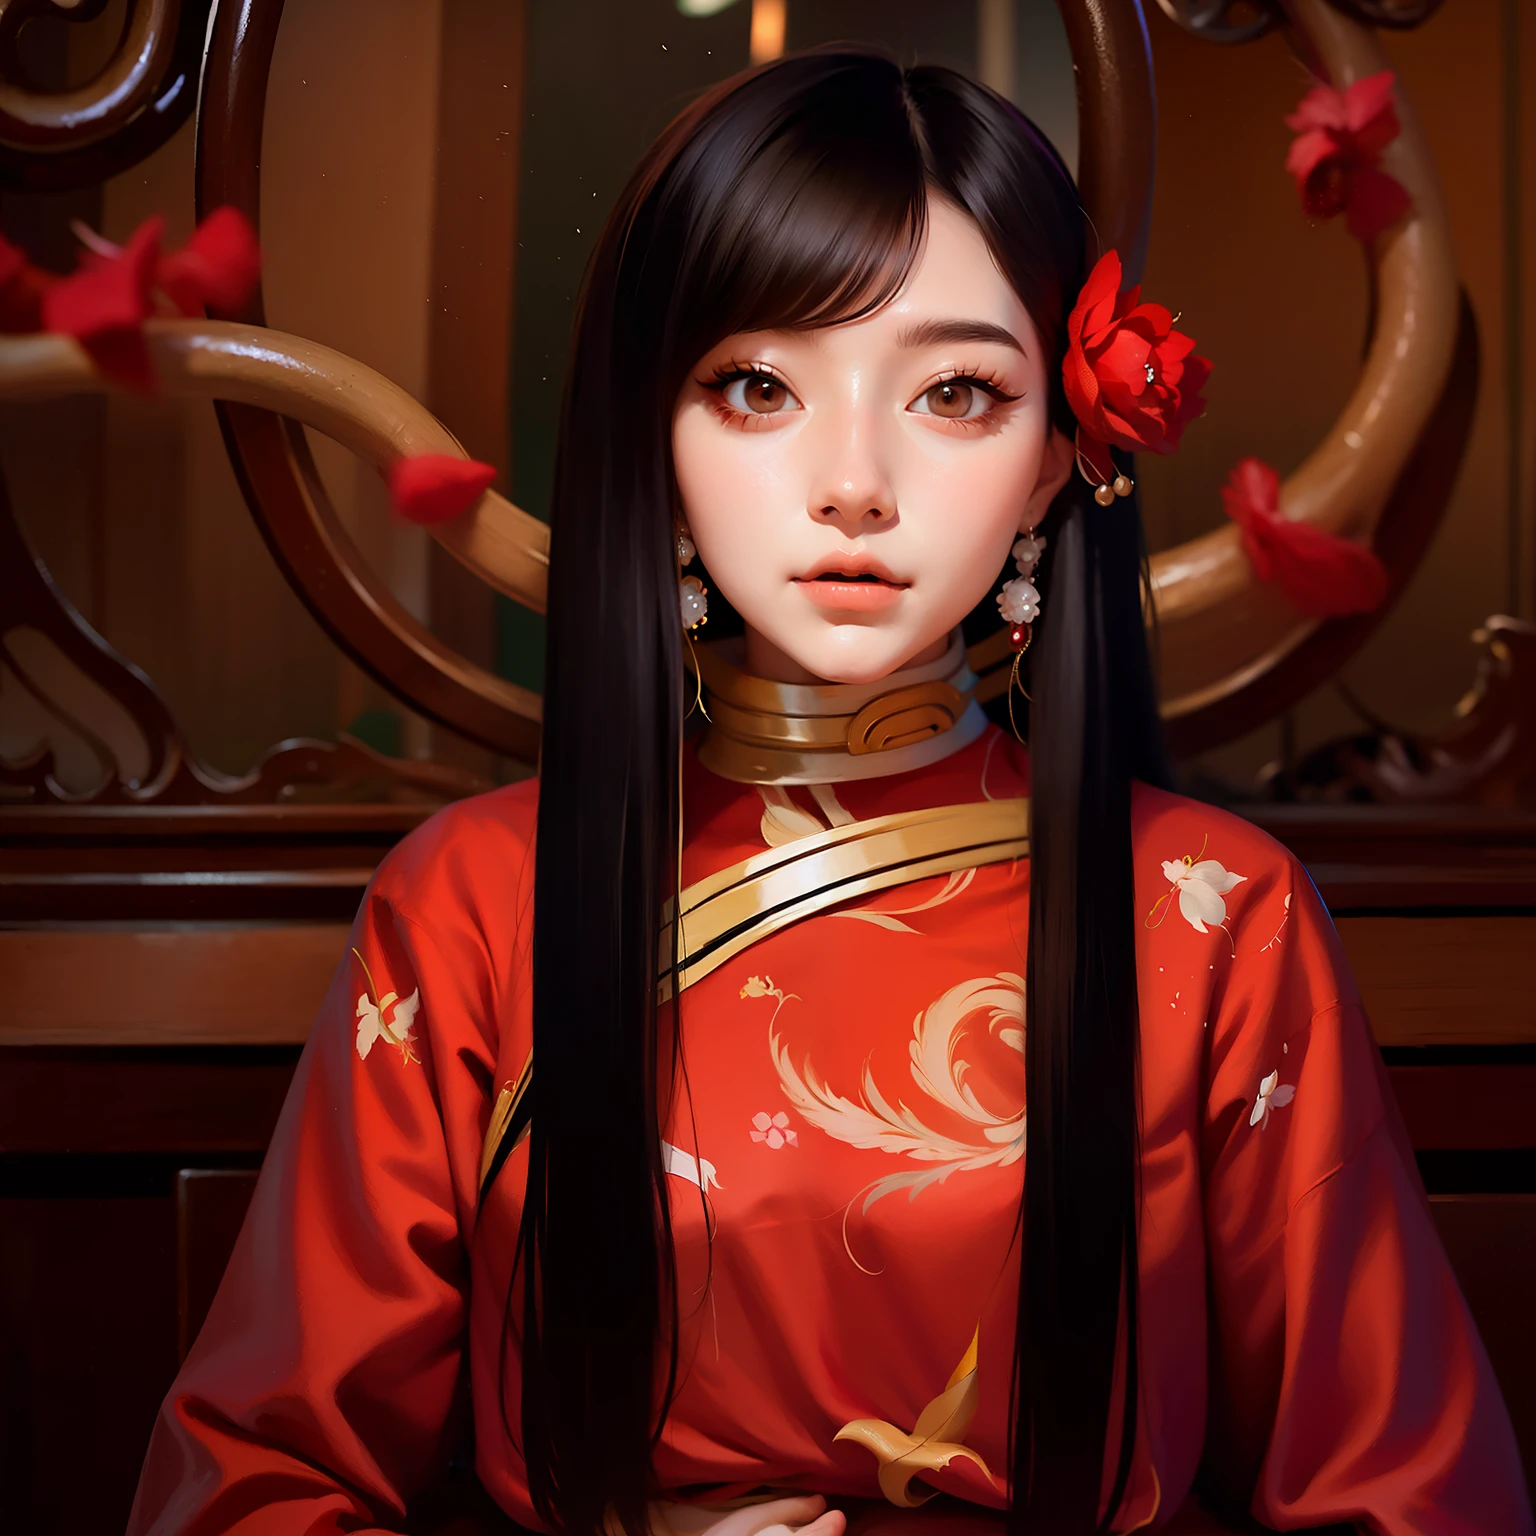 there is a woman with long black hair wearing a red dress, artwork in the style of guweiz, jingna zhang, palace ， a girl in hanfu, beautiful character painting, beautiful digital artwork, a beautiful artwork illustration, guweiz, gorgeous digital painting, chinese girl, beautiful digital painting, inspired by Yun Du-seo, by Yu Zhiding